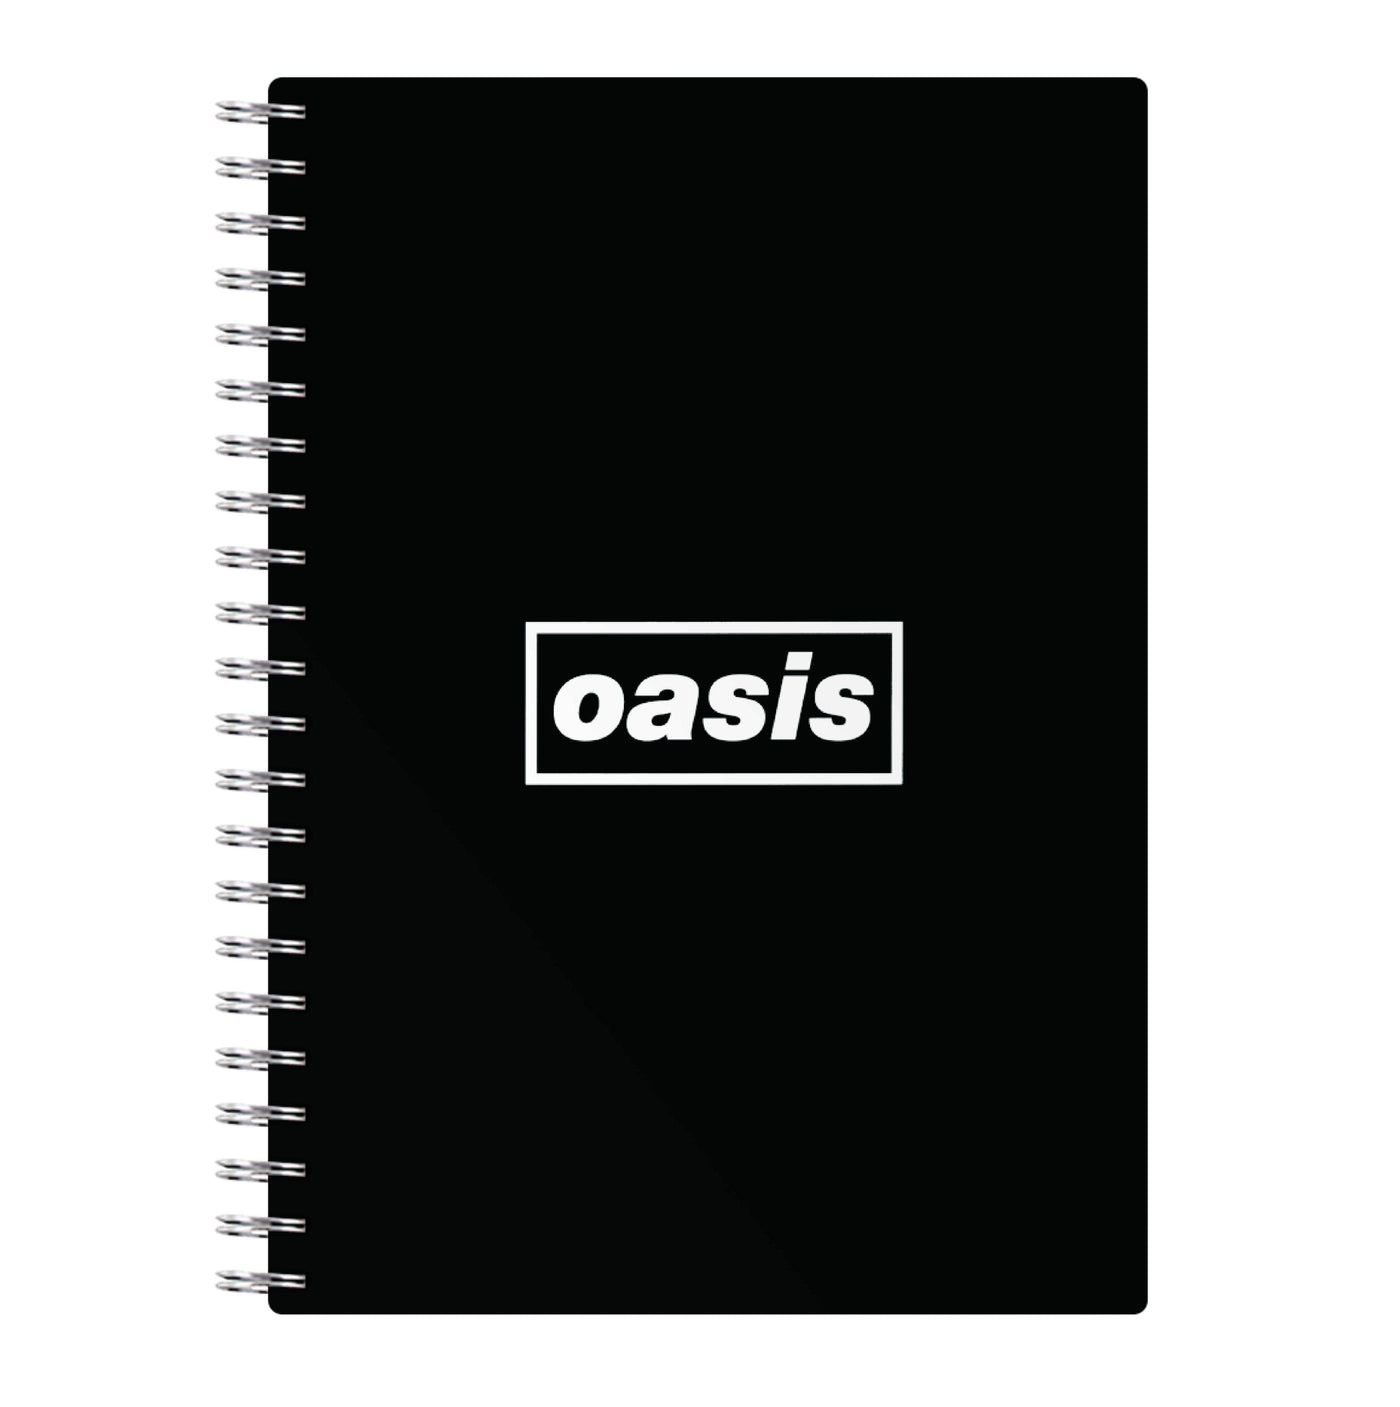 Band Name Black - Oasis Notebook